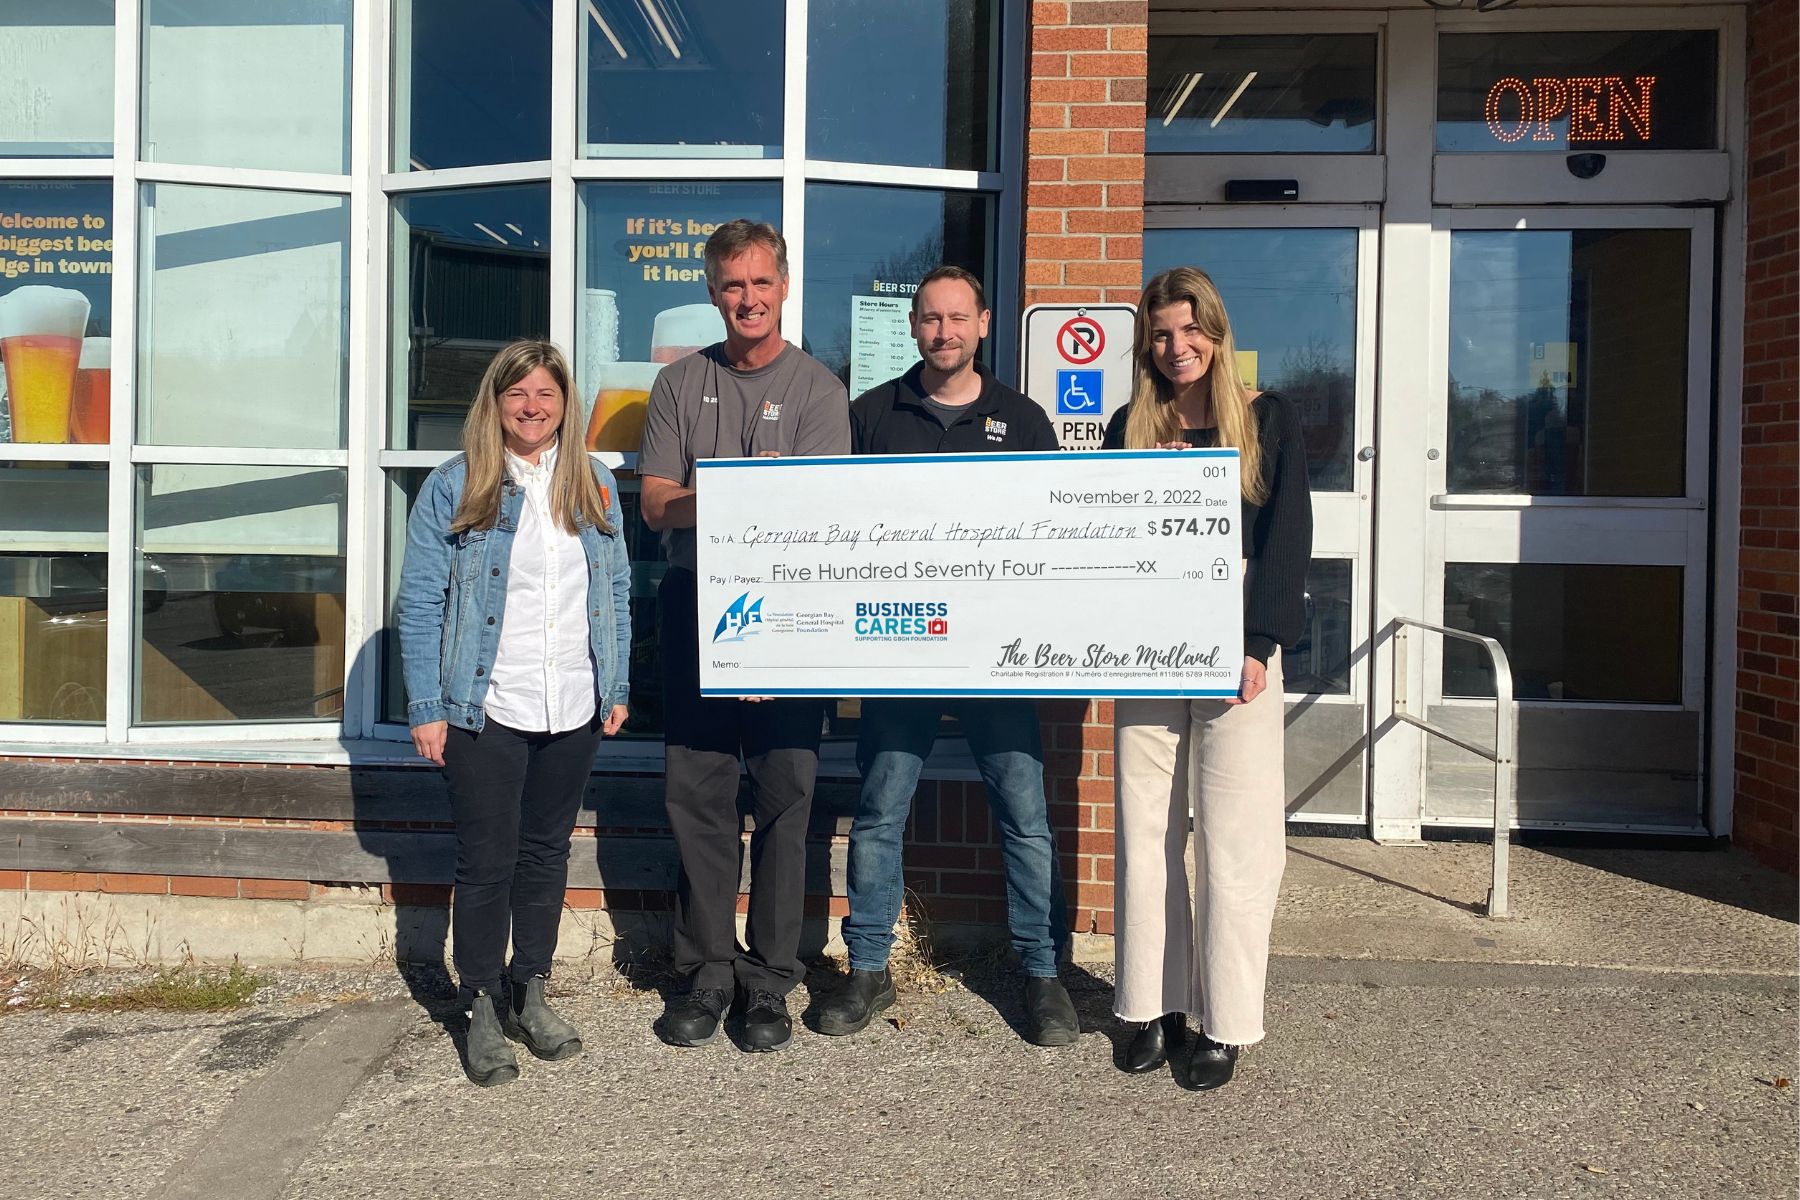 The Beer Store Midland – Business Cares Donation!